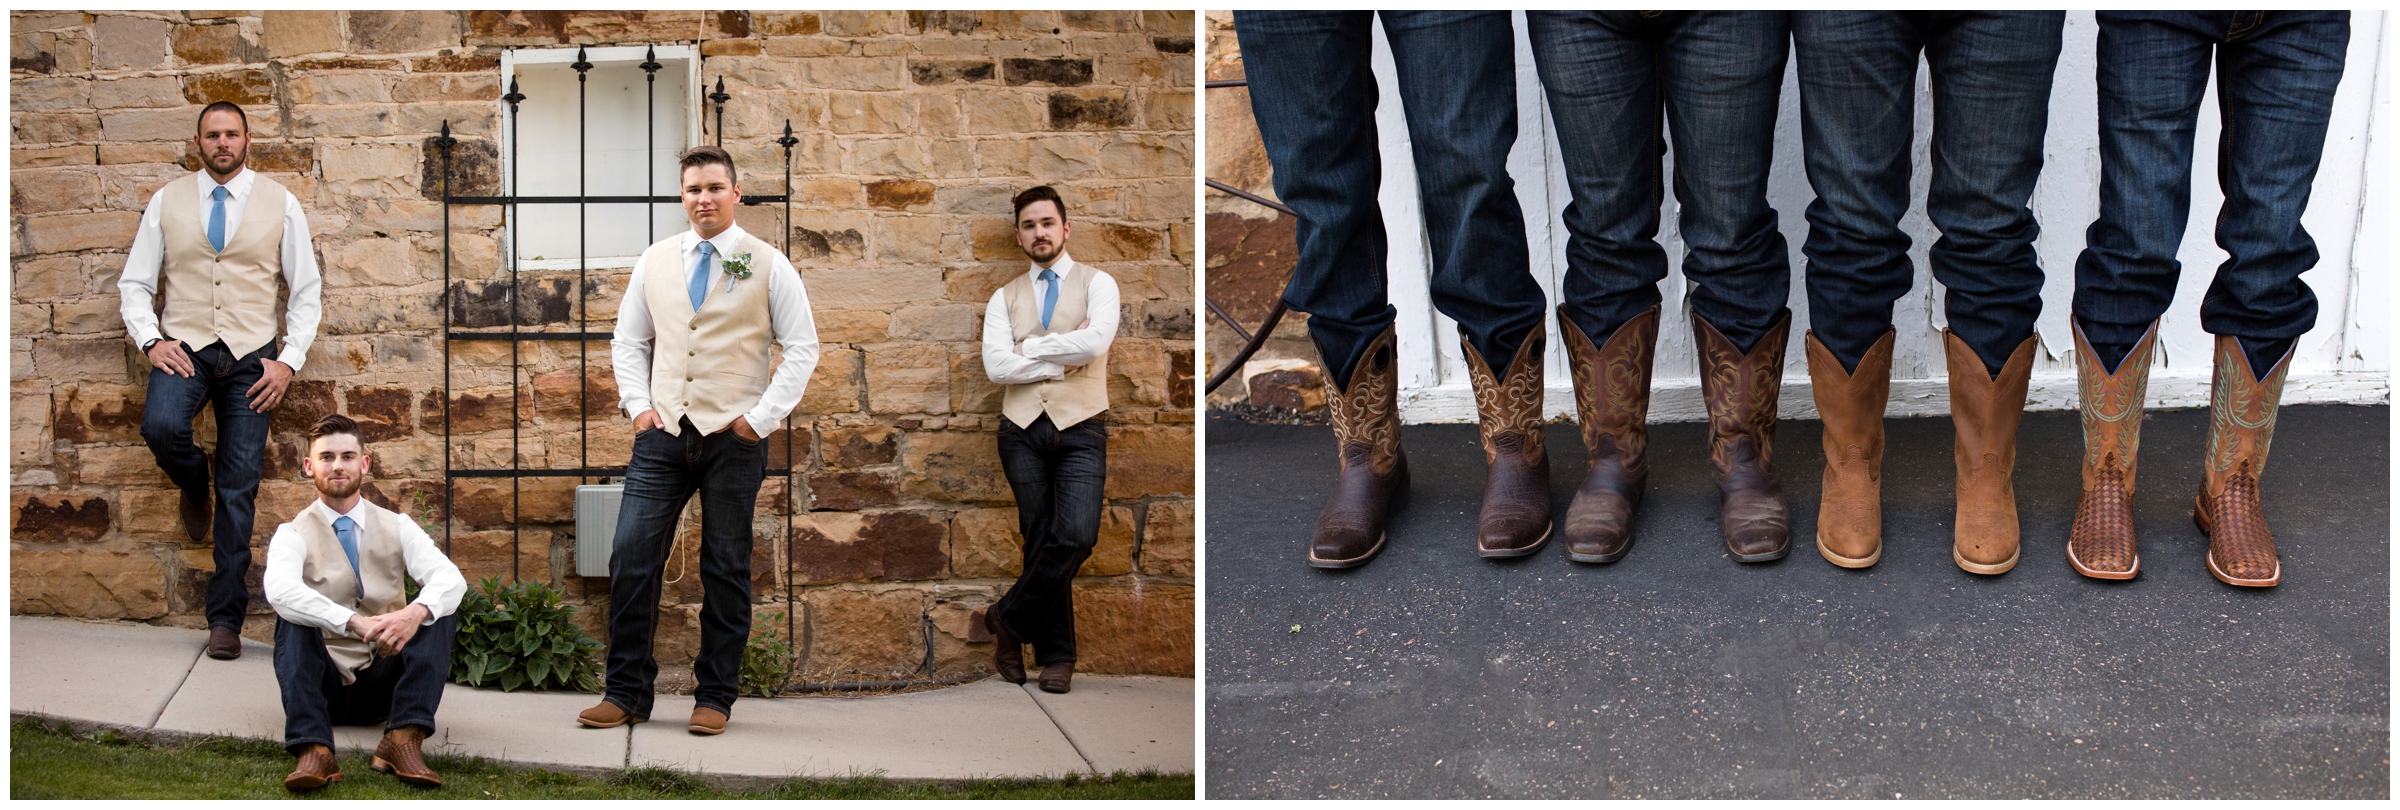 groomsmen in jeans and cowboy boots at Colorado wedding